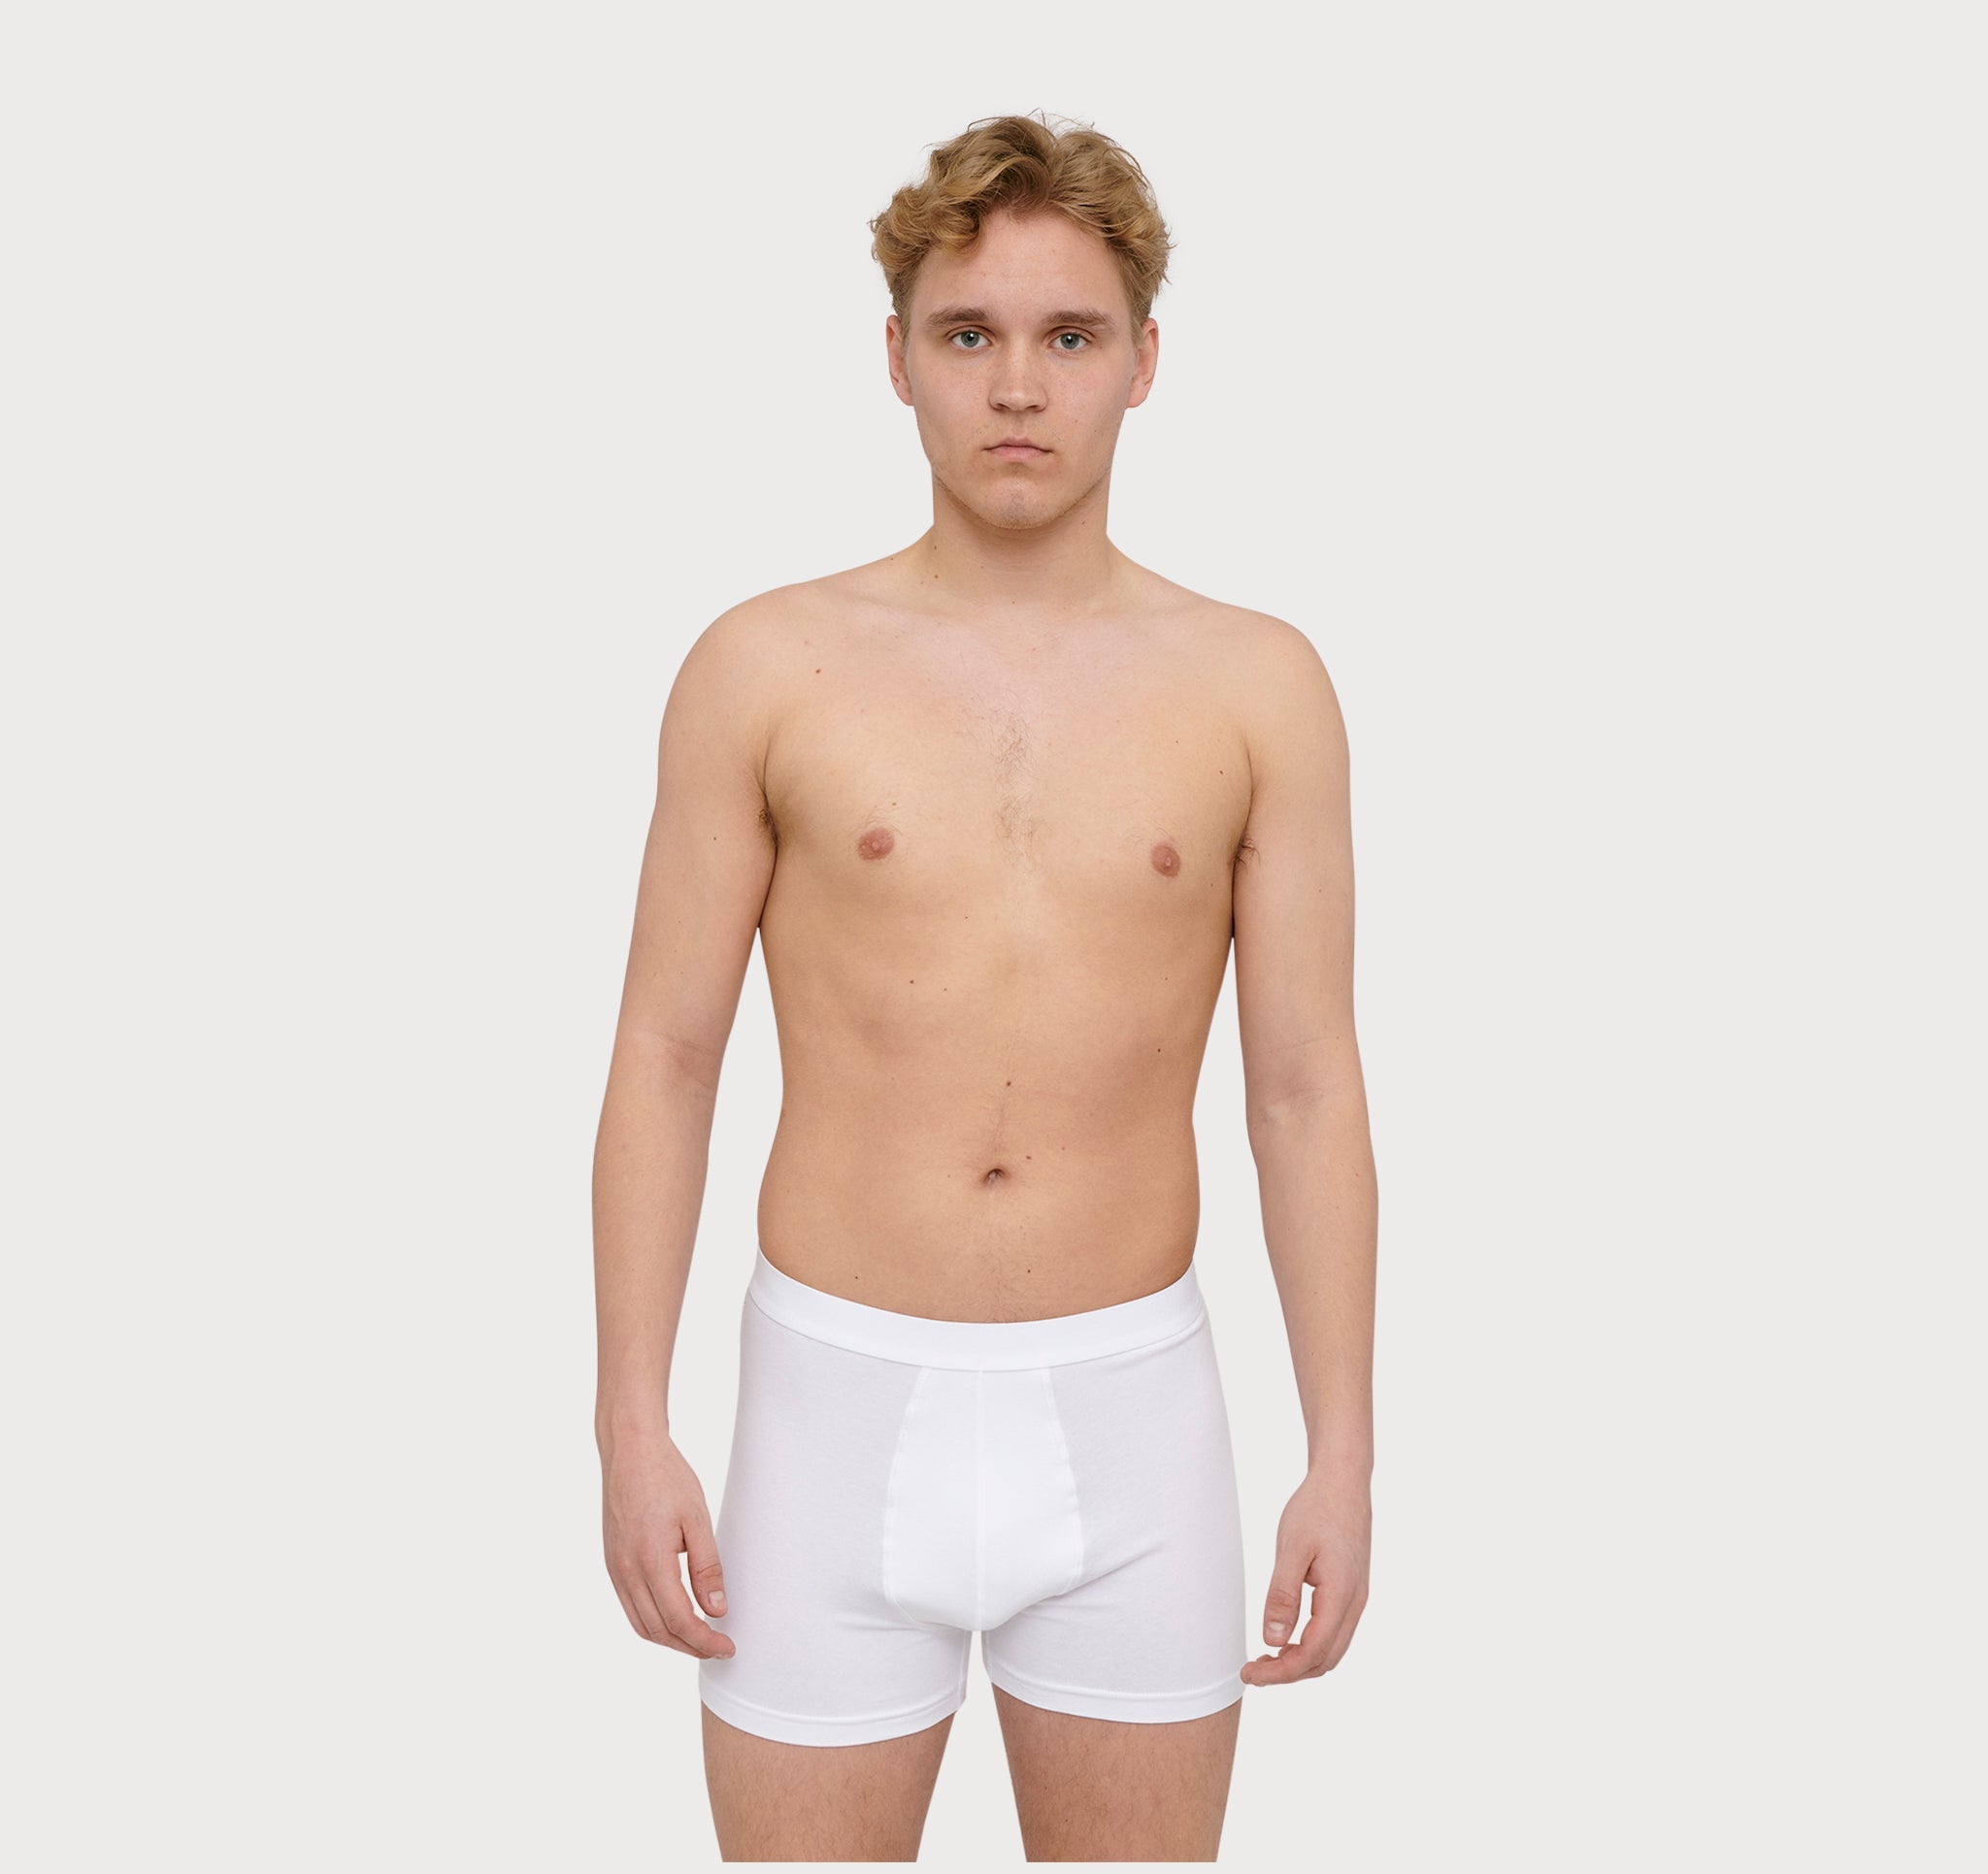 New Men's Organic Cotton Underwear Launched - 2022 Sustainable